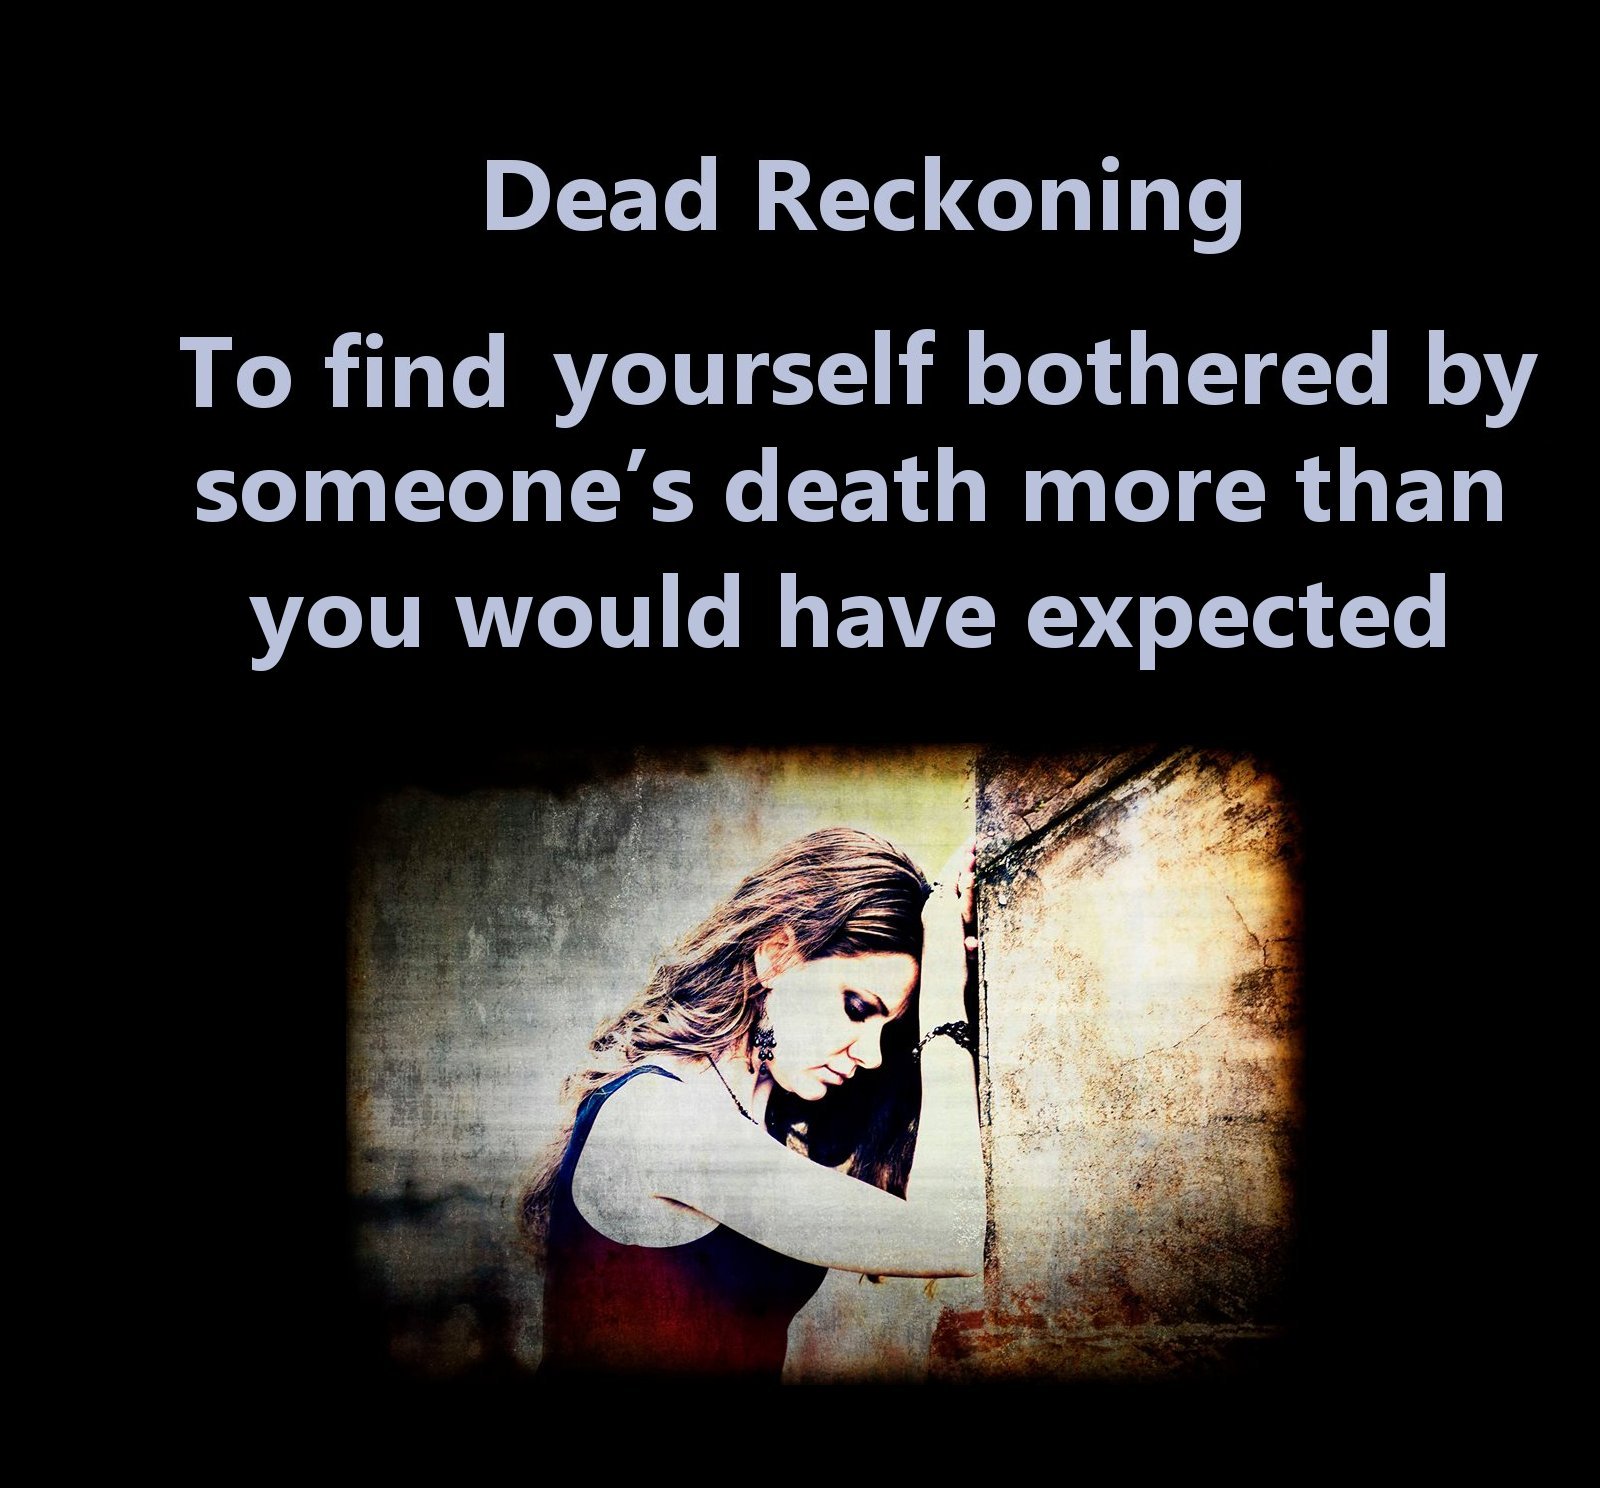 human behavior - Dead Reckoning To find yourself bothered by someone's death more than you would have expected